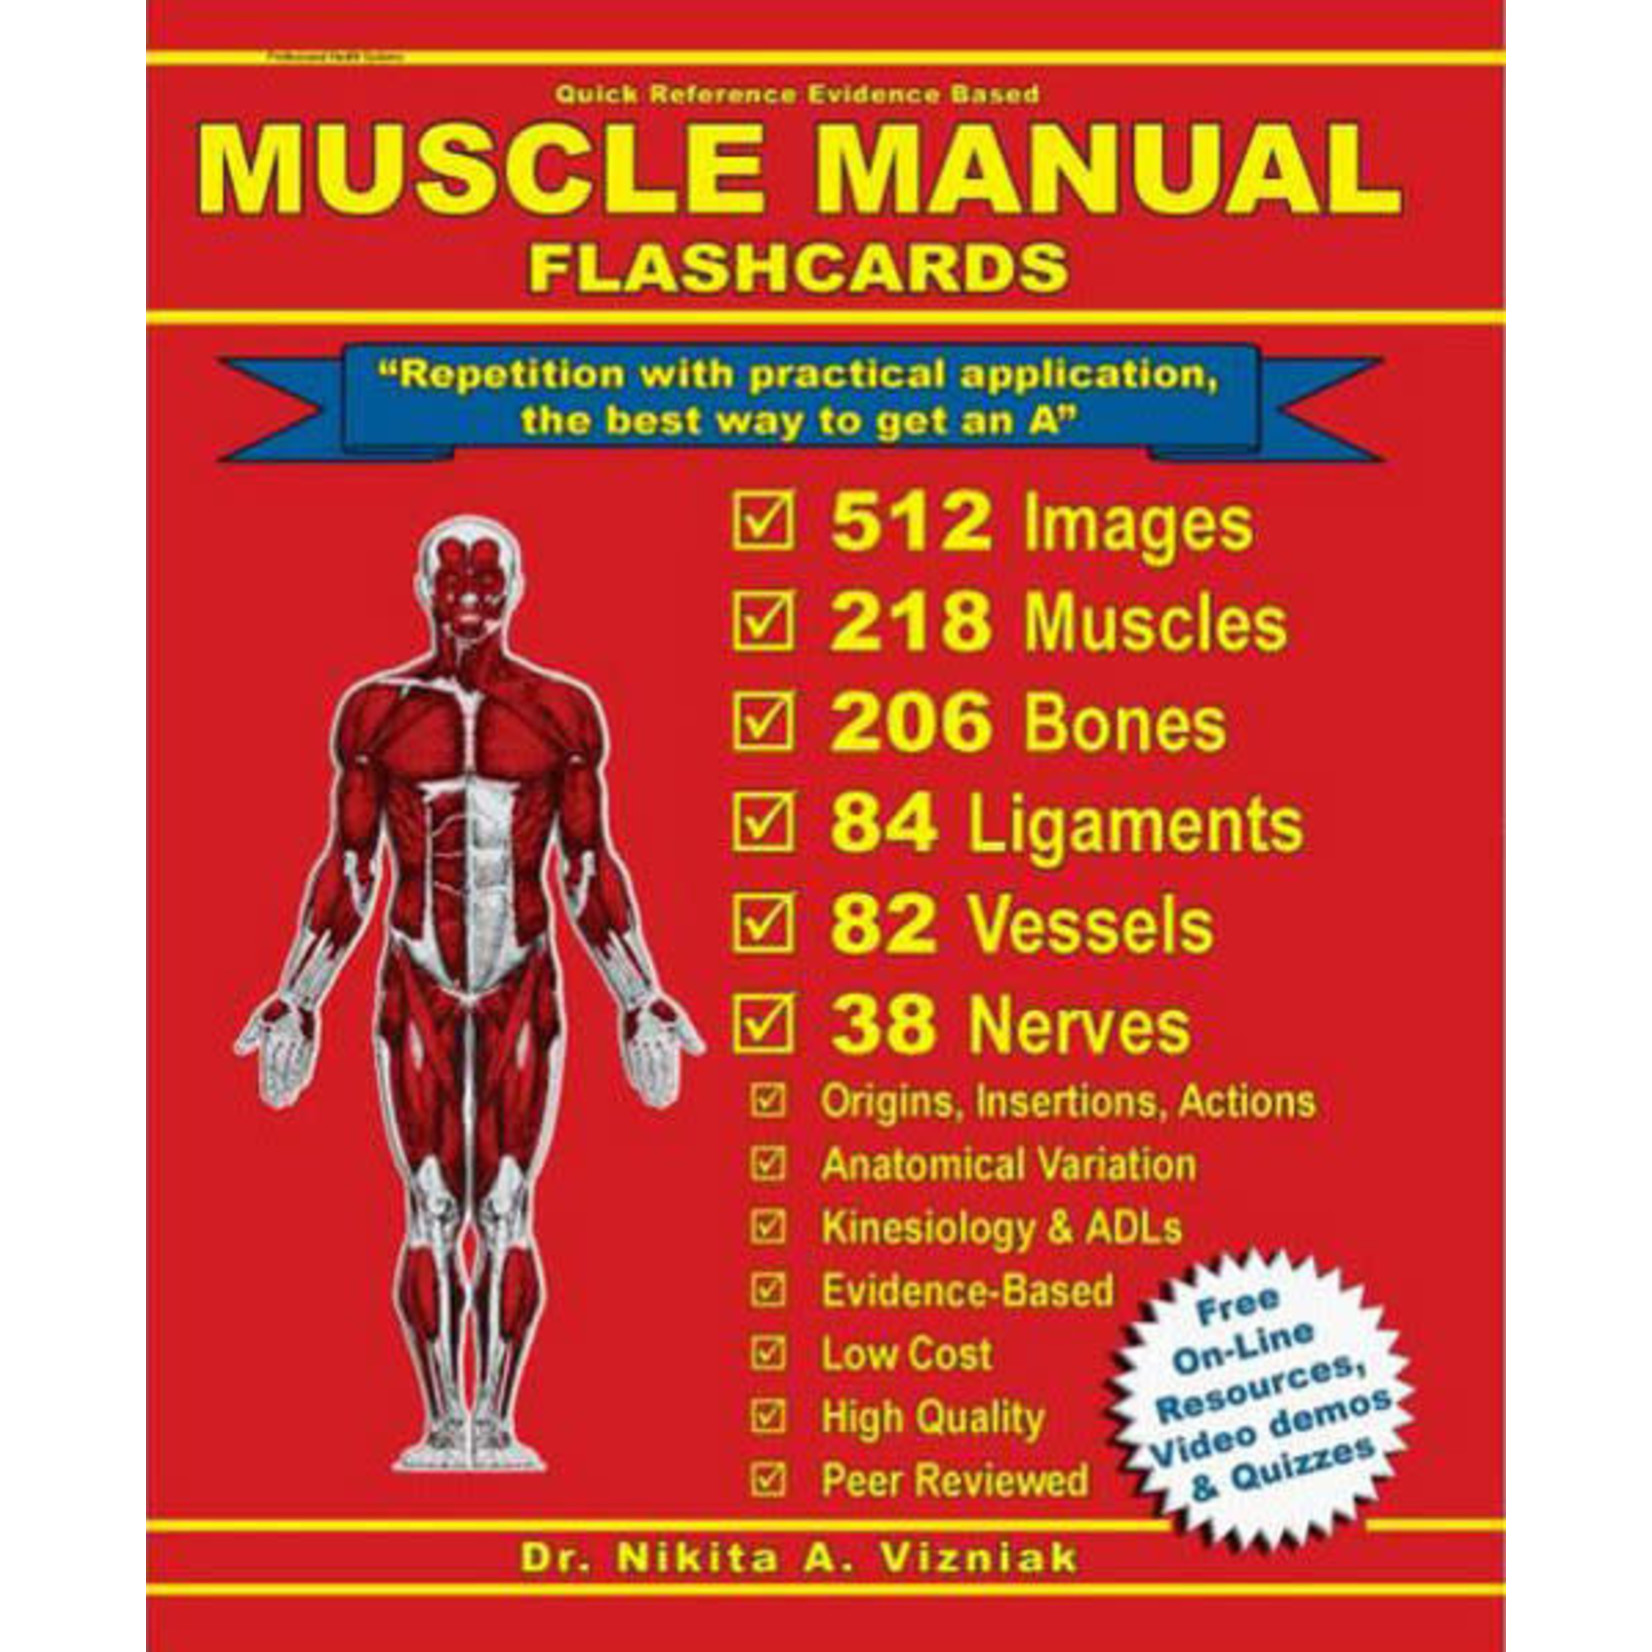 PROHEALTHSYS PROHEALTHSYS MUSCLE MANUAL FLASHCARDS